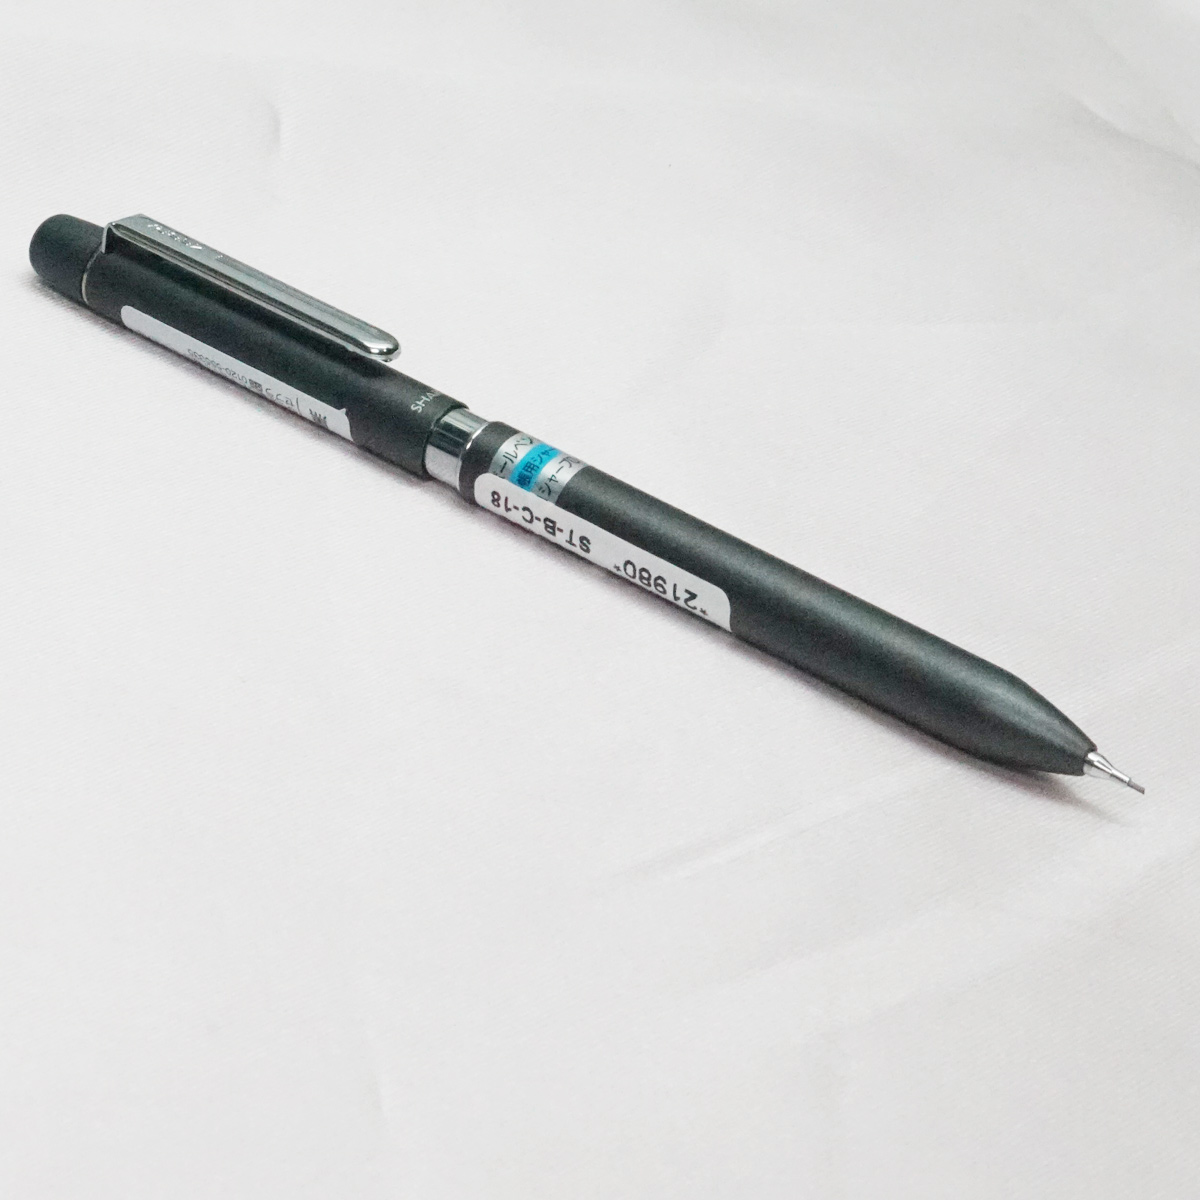 Zebra SBA1 Grey Color Body and Cap Two in One Fine Tip Ball Pen and Pencil SKU 21980